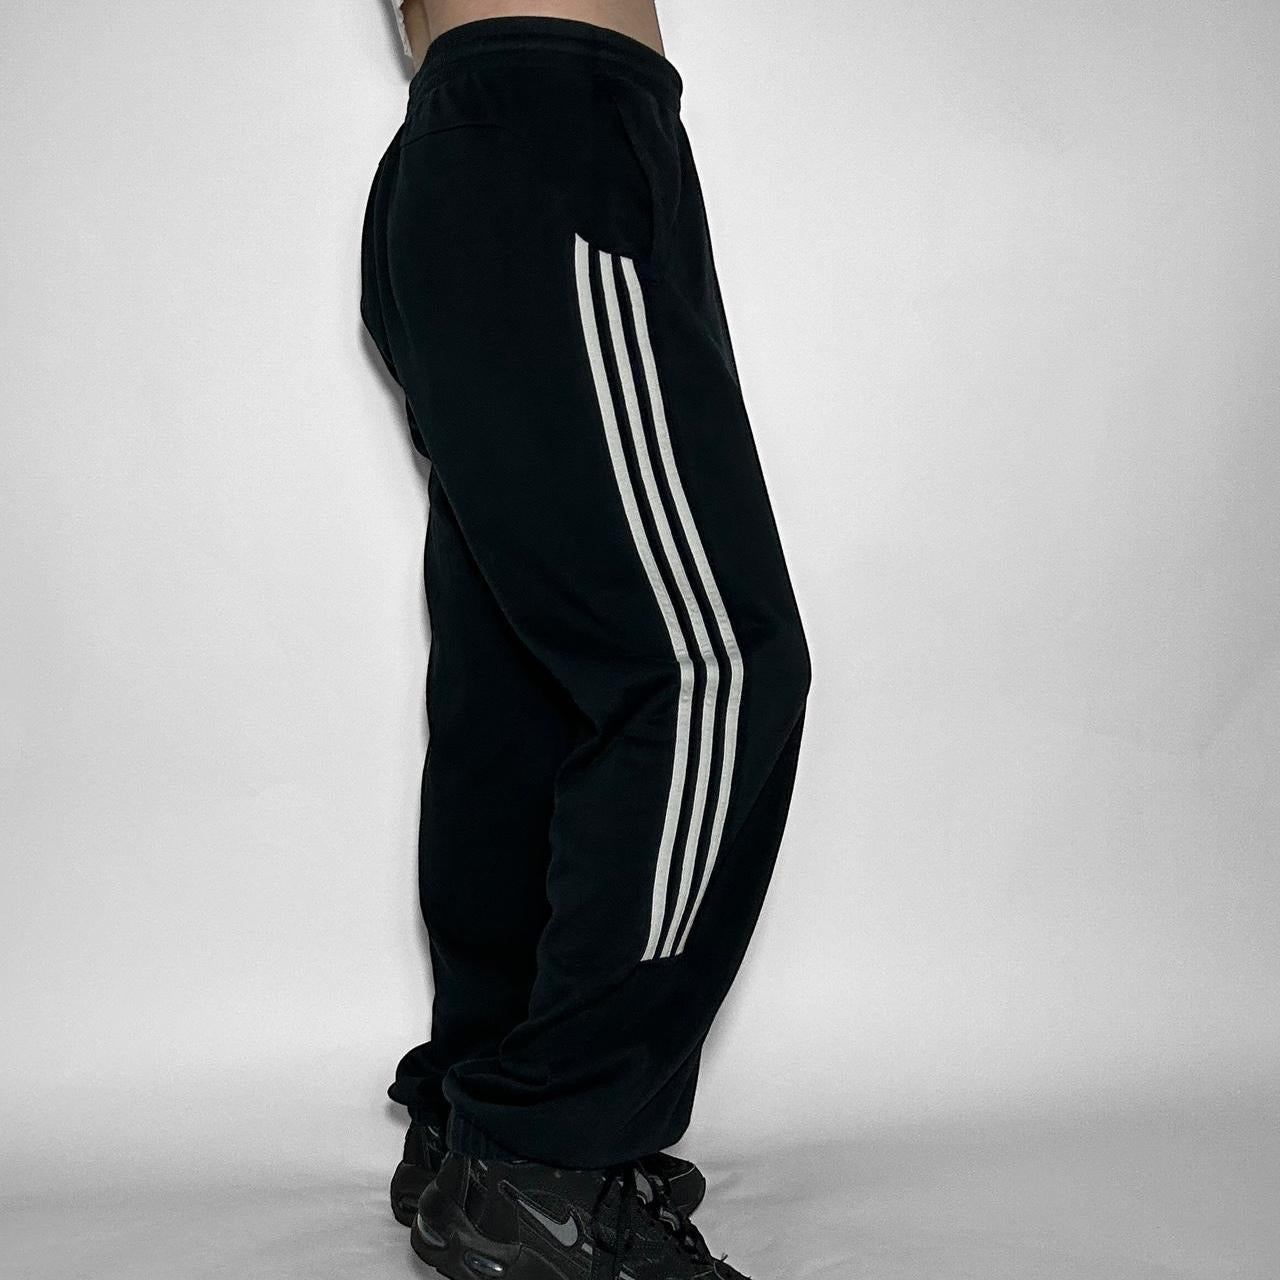 Vintage Adidas unisex black and white 90s baggy track pants